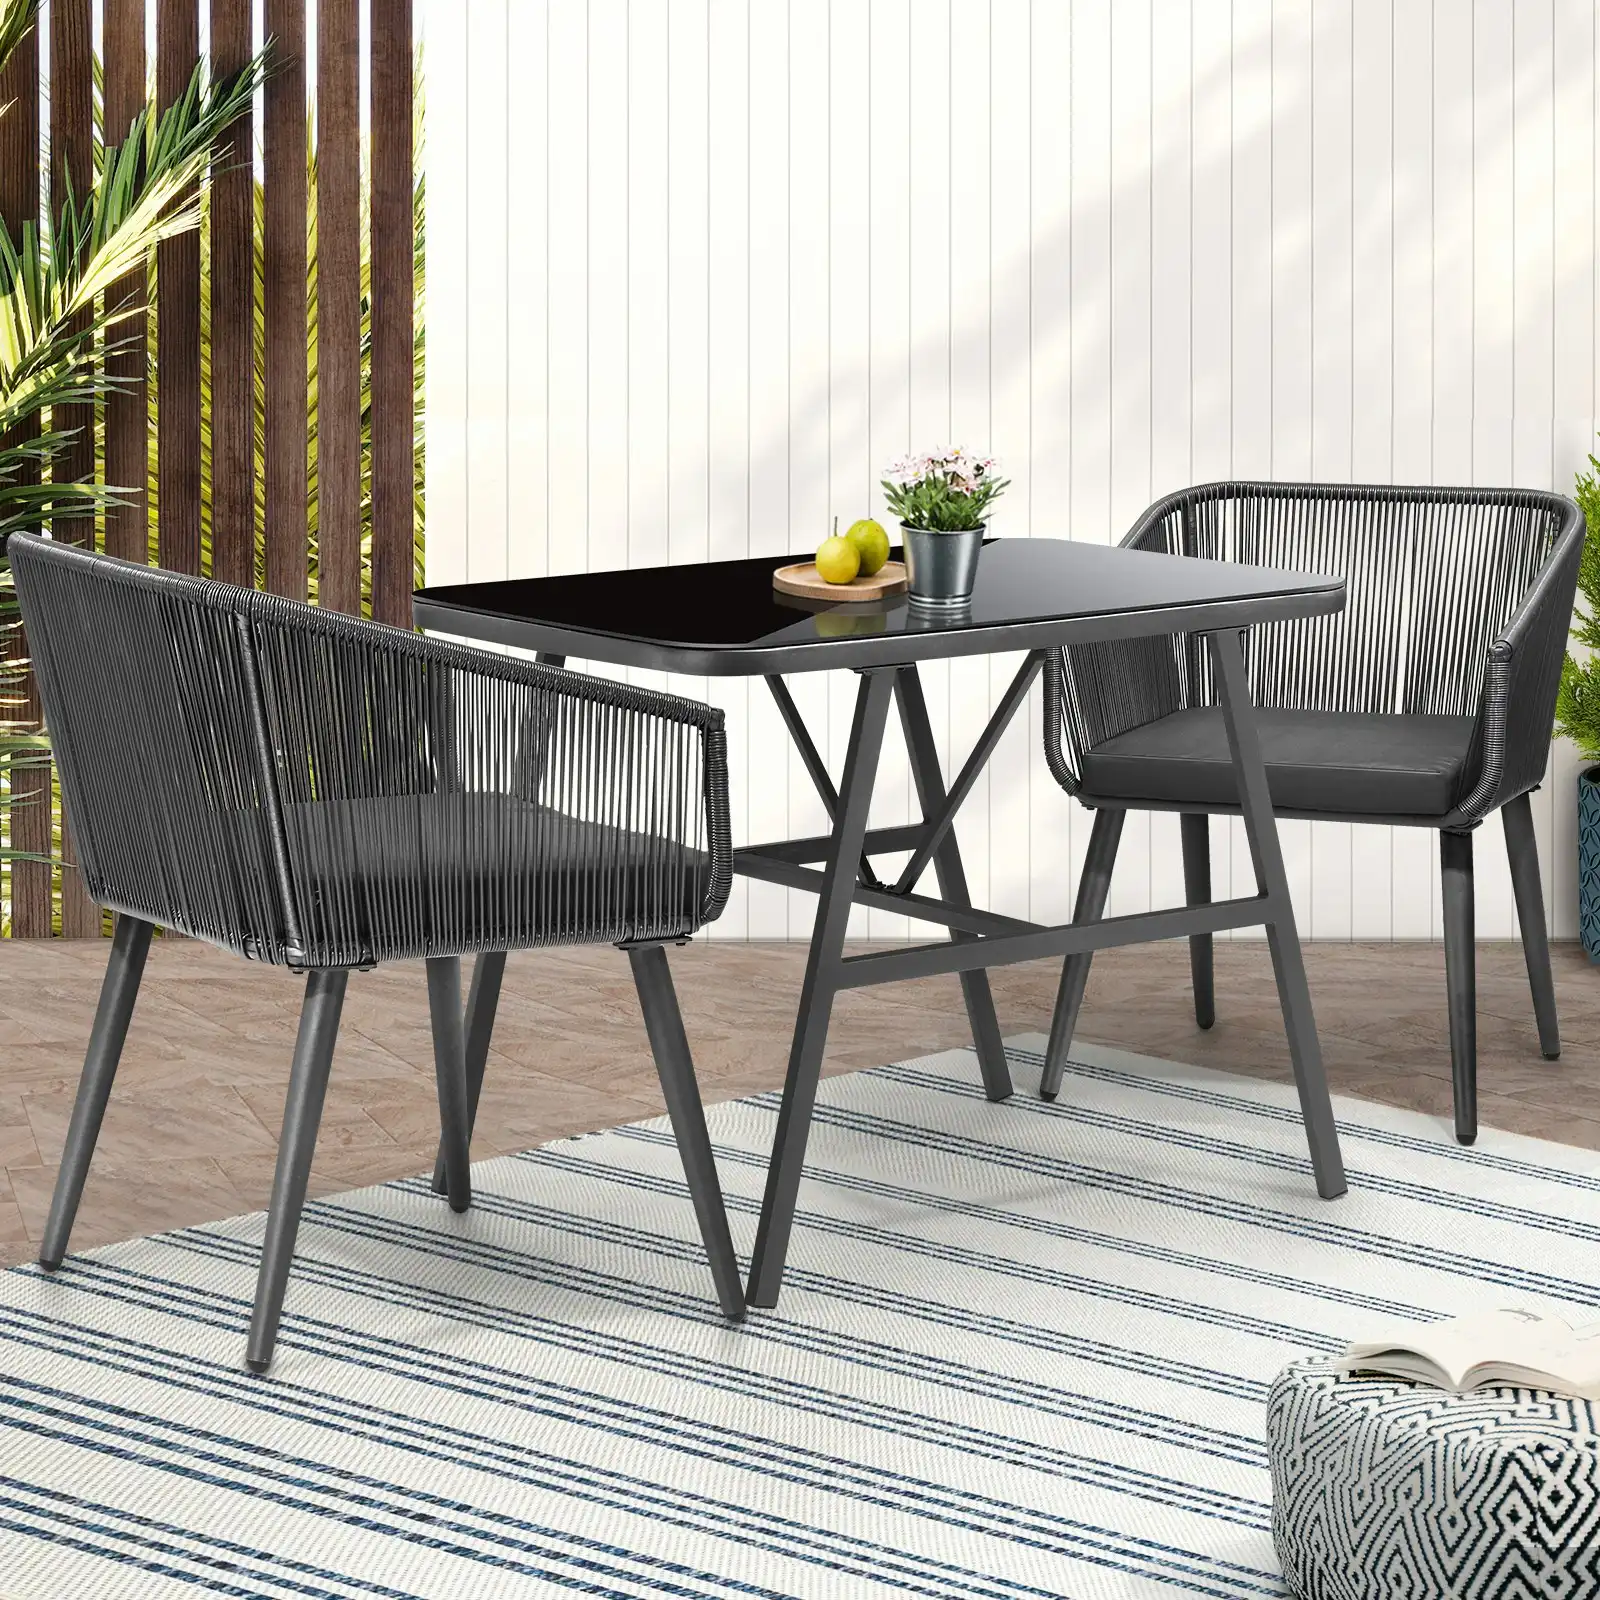 Livsip Outdoor Dining Setting 3 Piece Lounge Patio Furniture Table Chairs Set